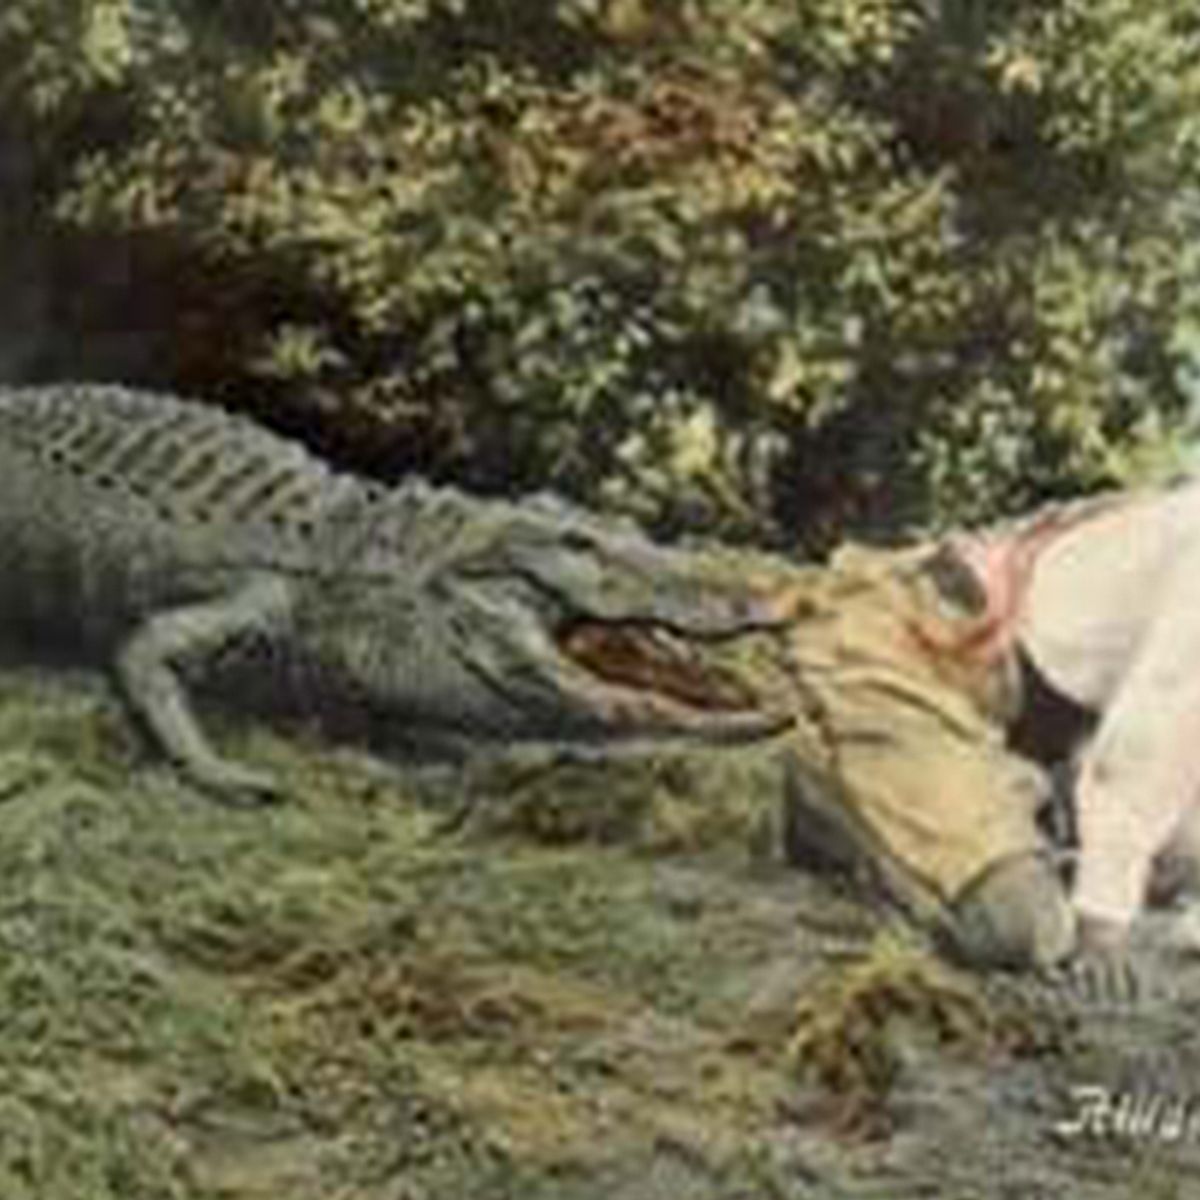 Were Black Children Used as Alligator Bait in the American South